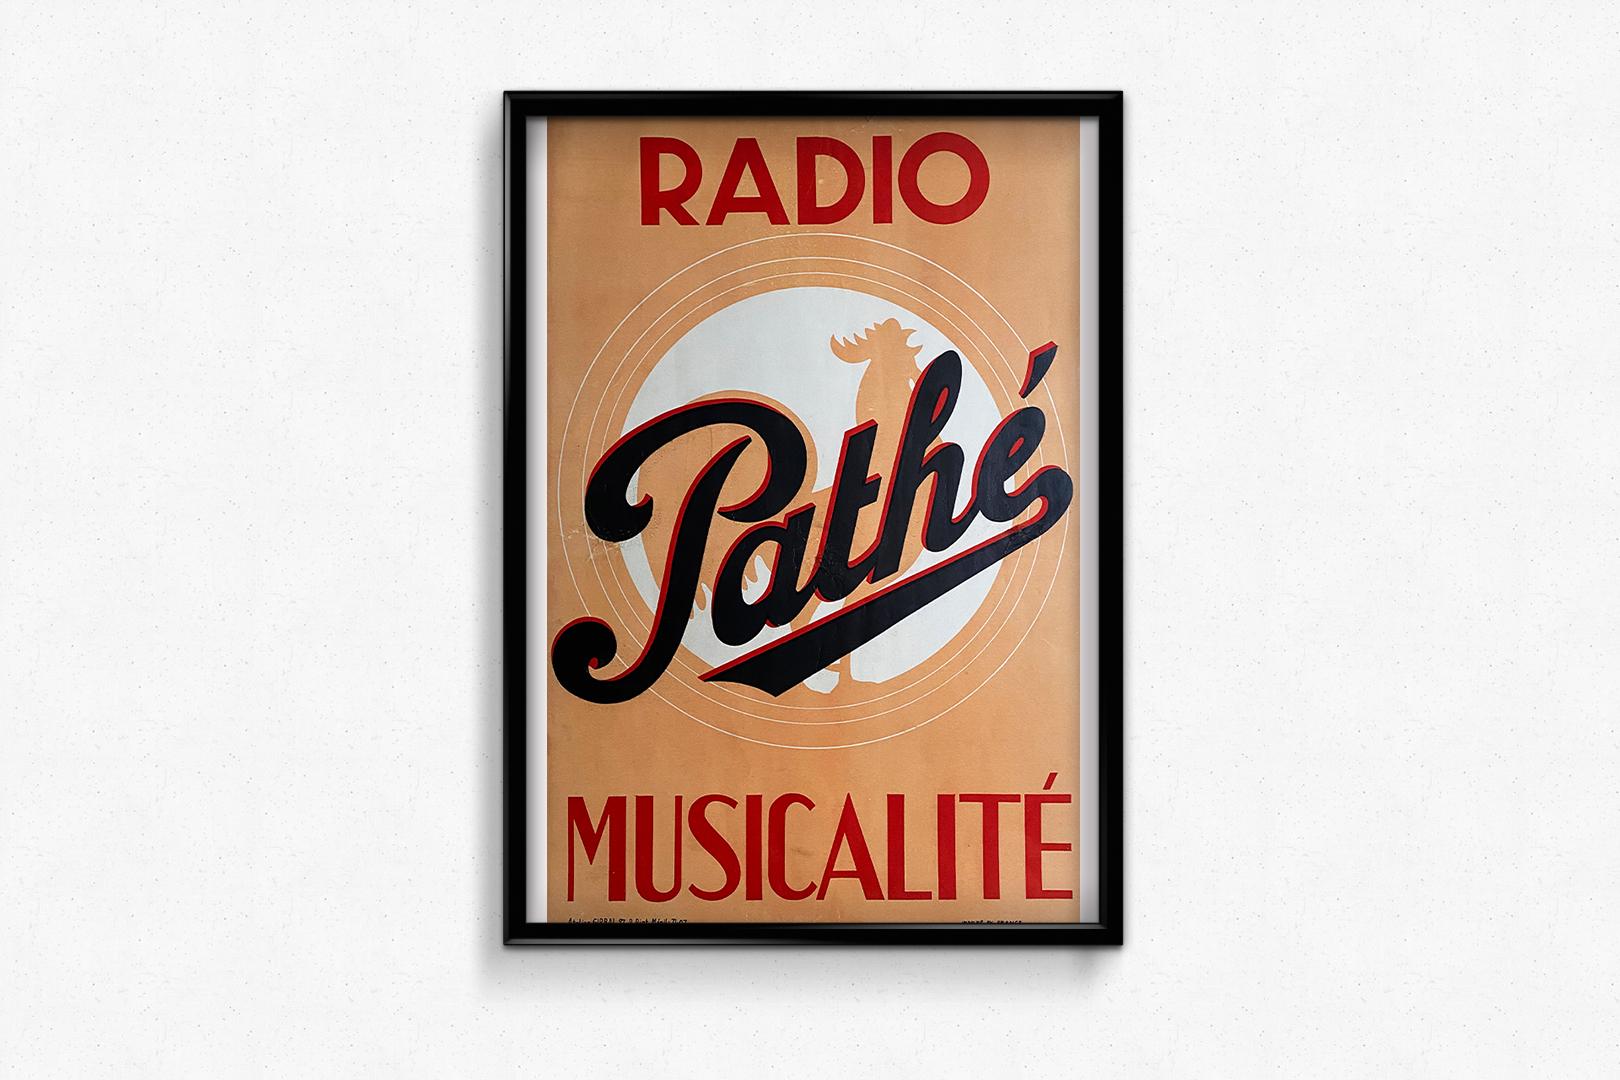 A beautiful vintage poster that highlights the world of the Pathé brand.
An emblematic brand that accompanied all French households during the 2nd World War, since it produced the old radio sets in particular.

Music - Coq -